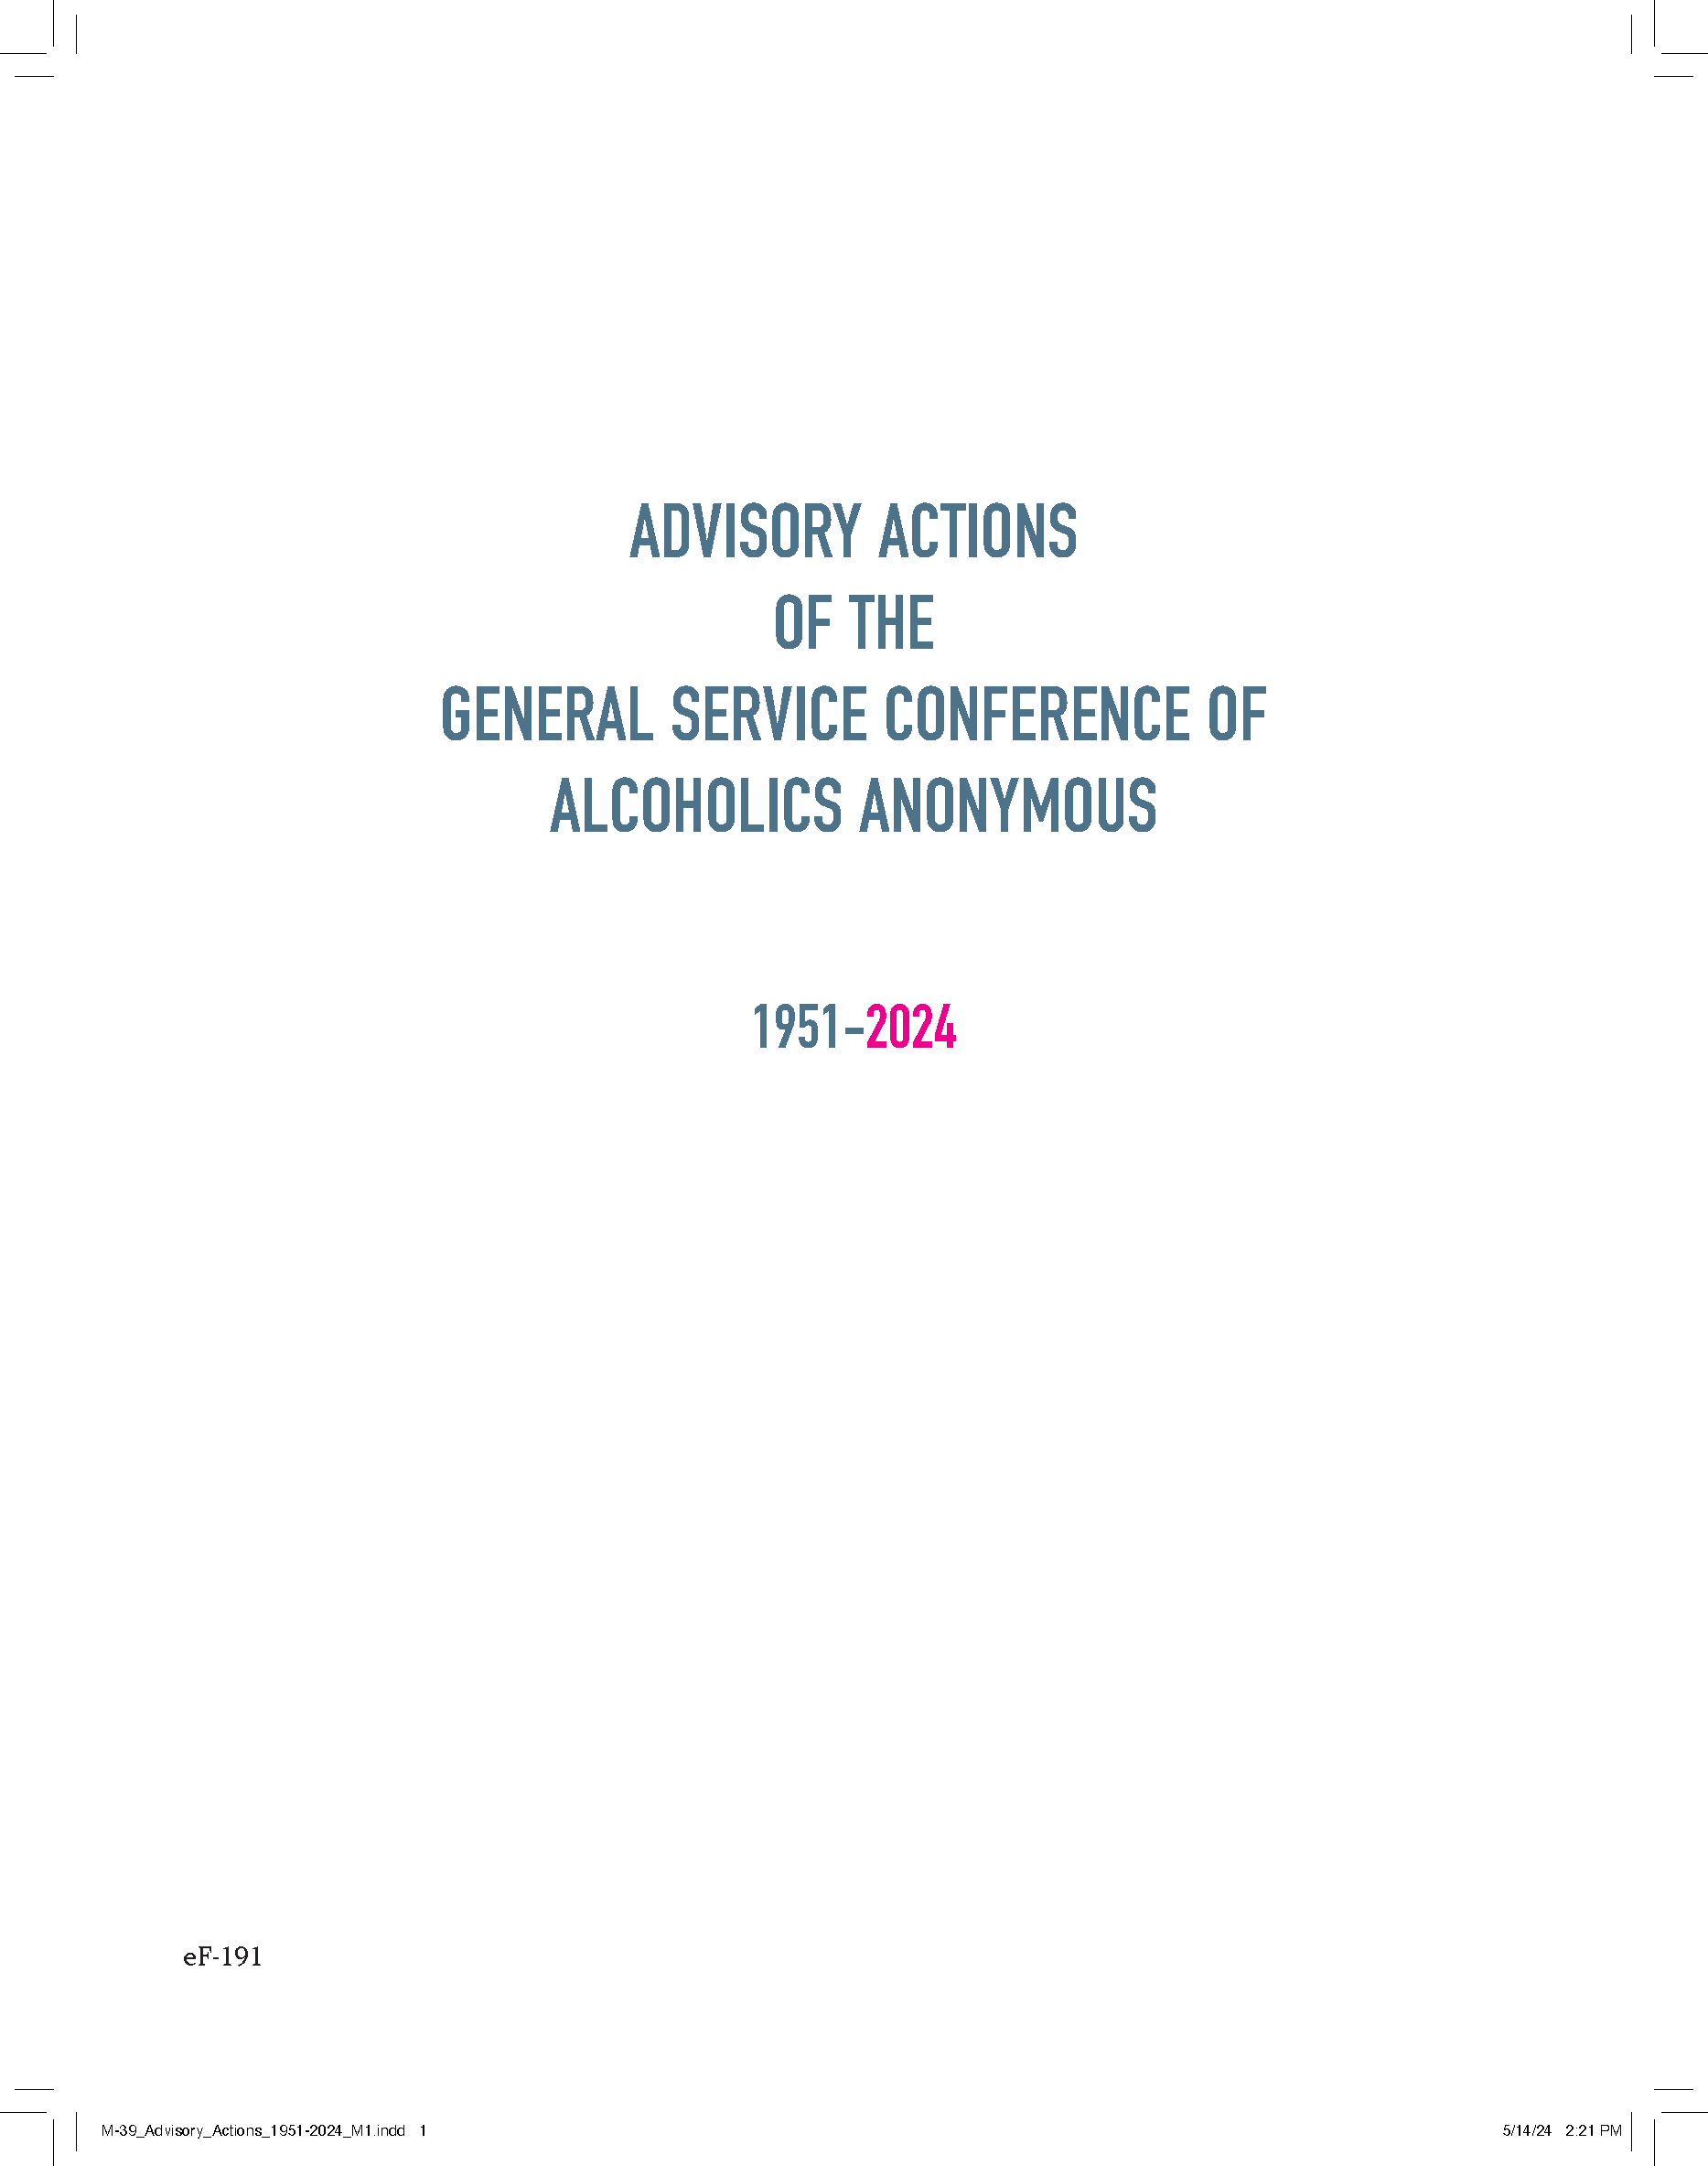 M-39_Advisory_Actions_1951-2024_M1.png